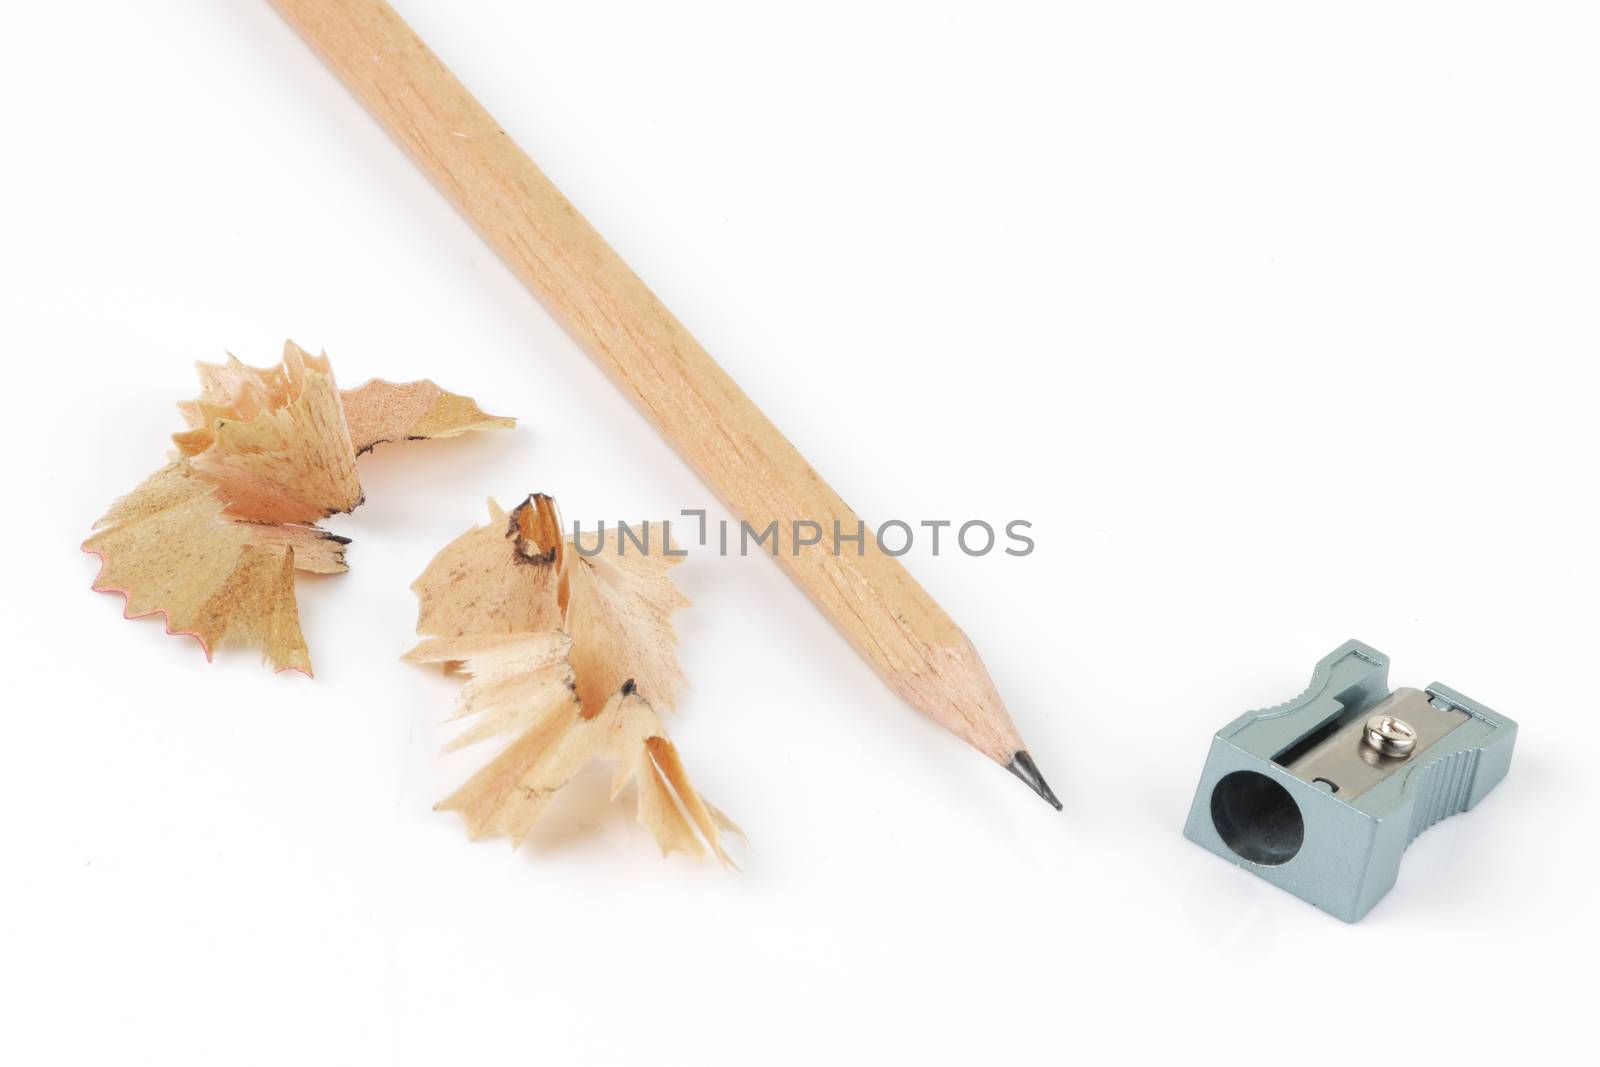 A top view of pencil and sharpener with shavings on white